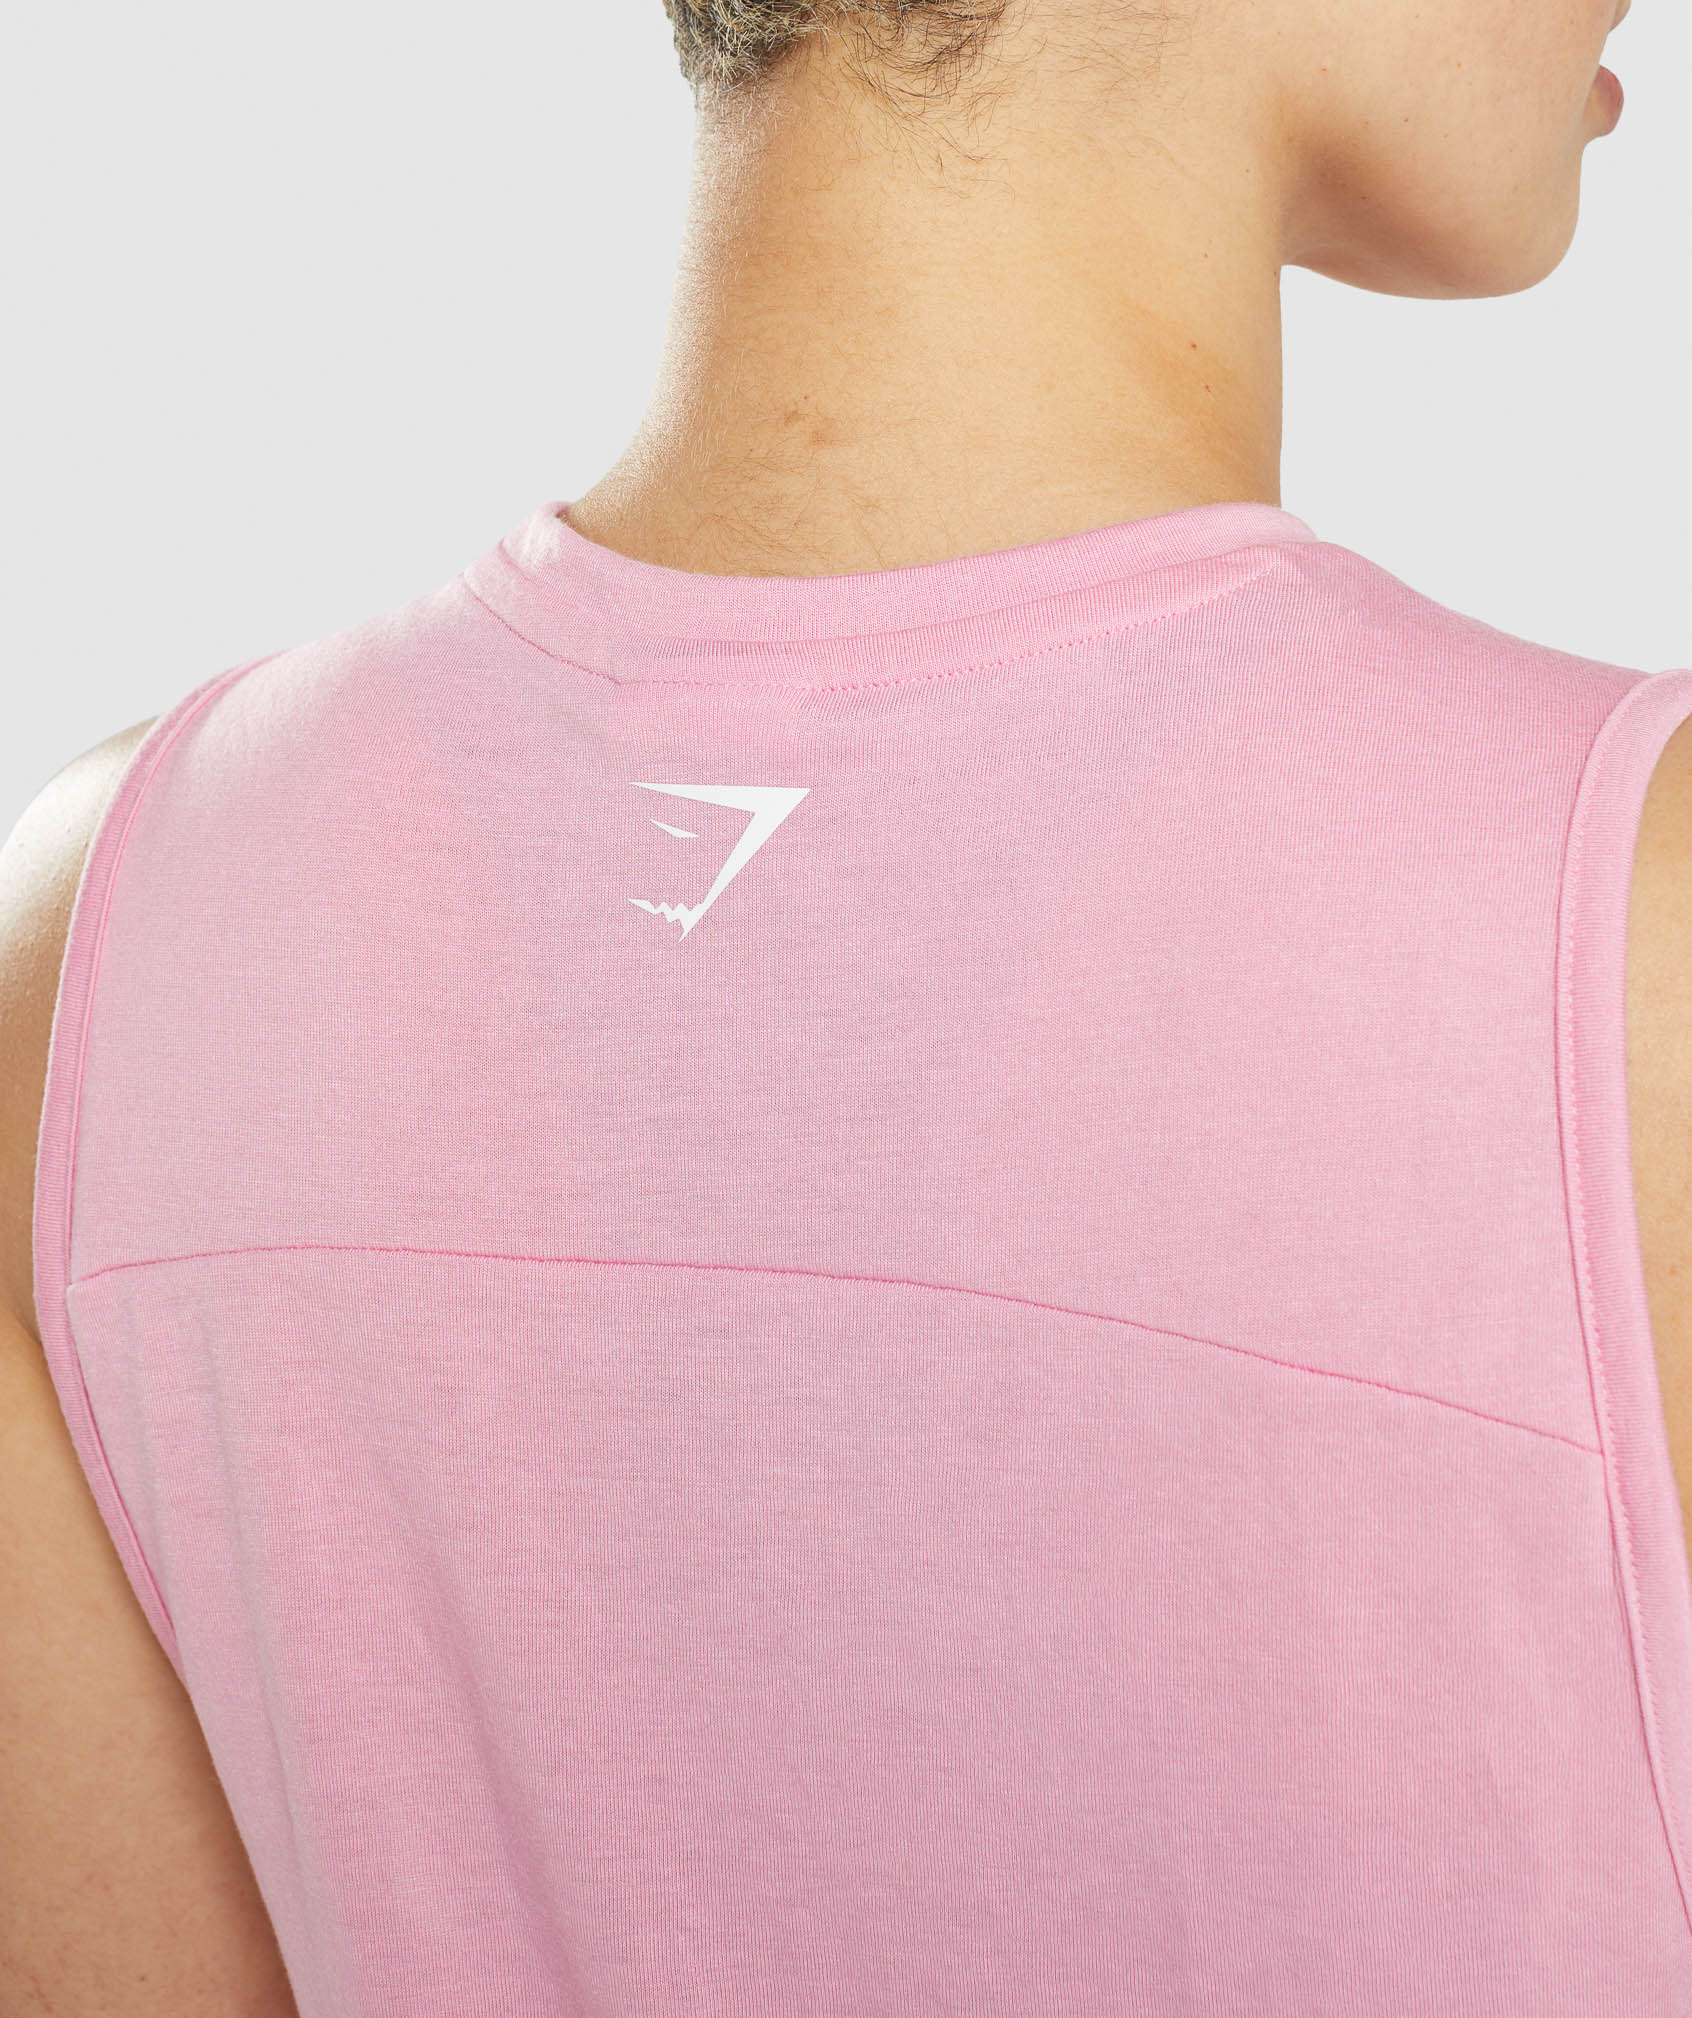 Its All You Drop Arm Tank in Sorbet Pink - view 5